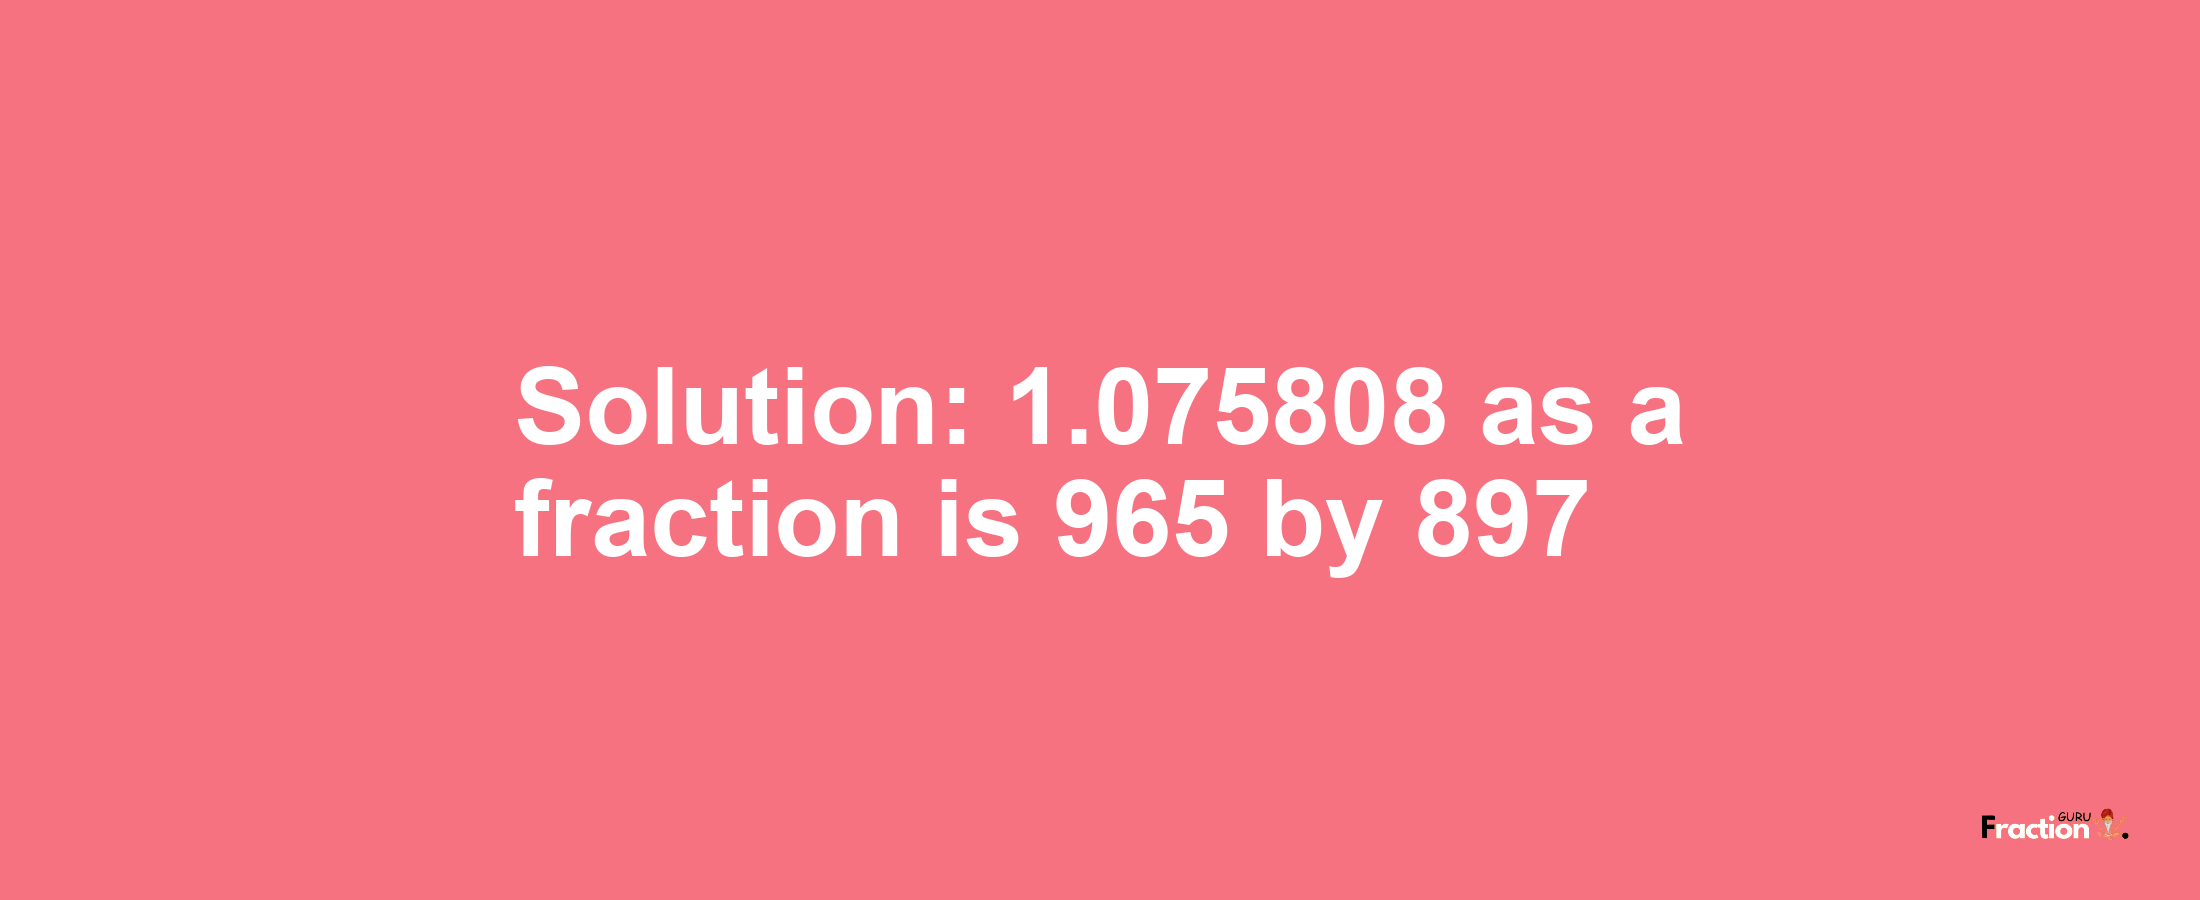 Solution:1.075808 as a fraction is 965/897